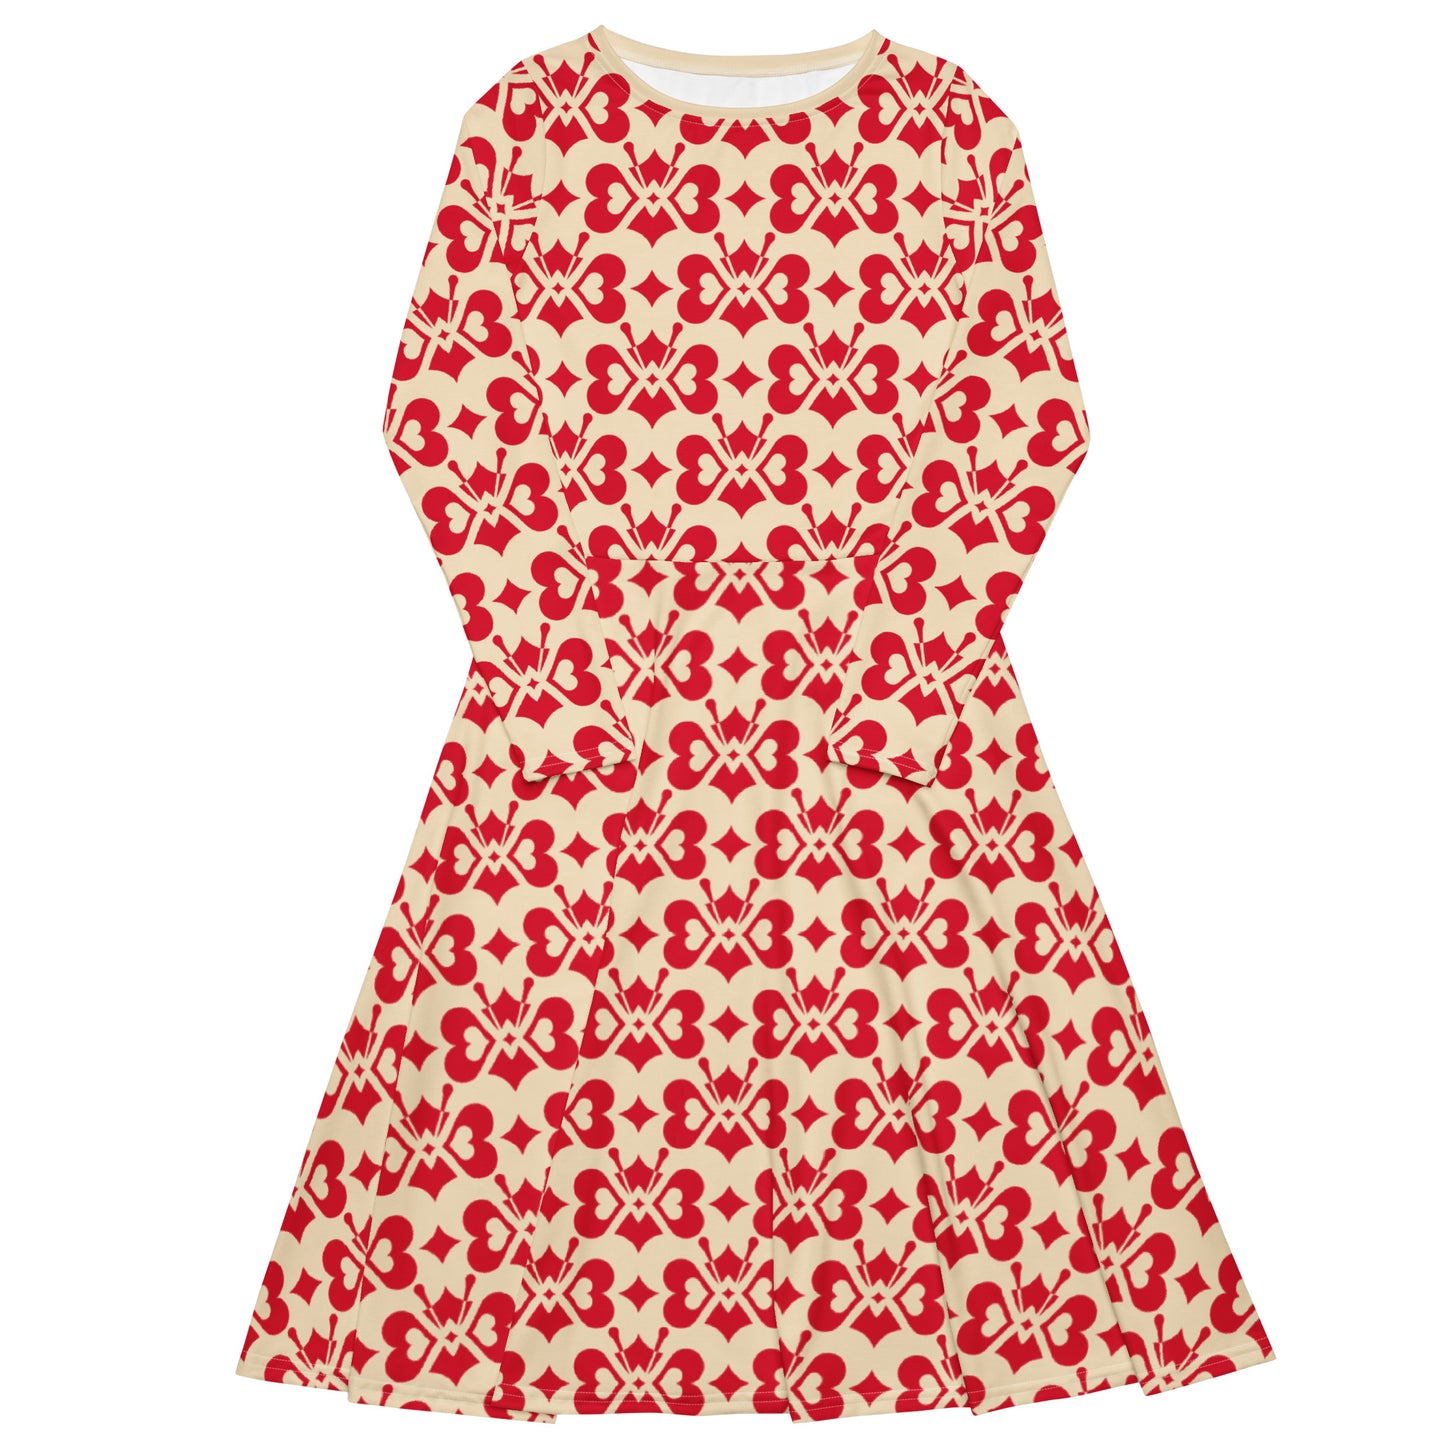 LOVE BUTTERFLY redlight - Midi dress with long sleeves and handy pockets